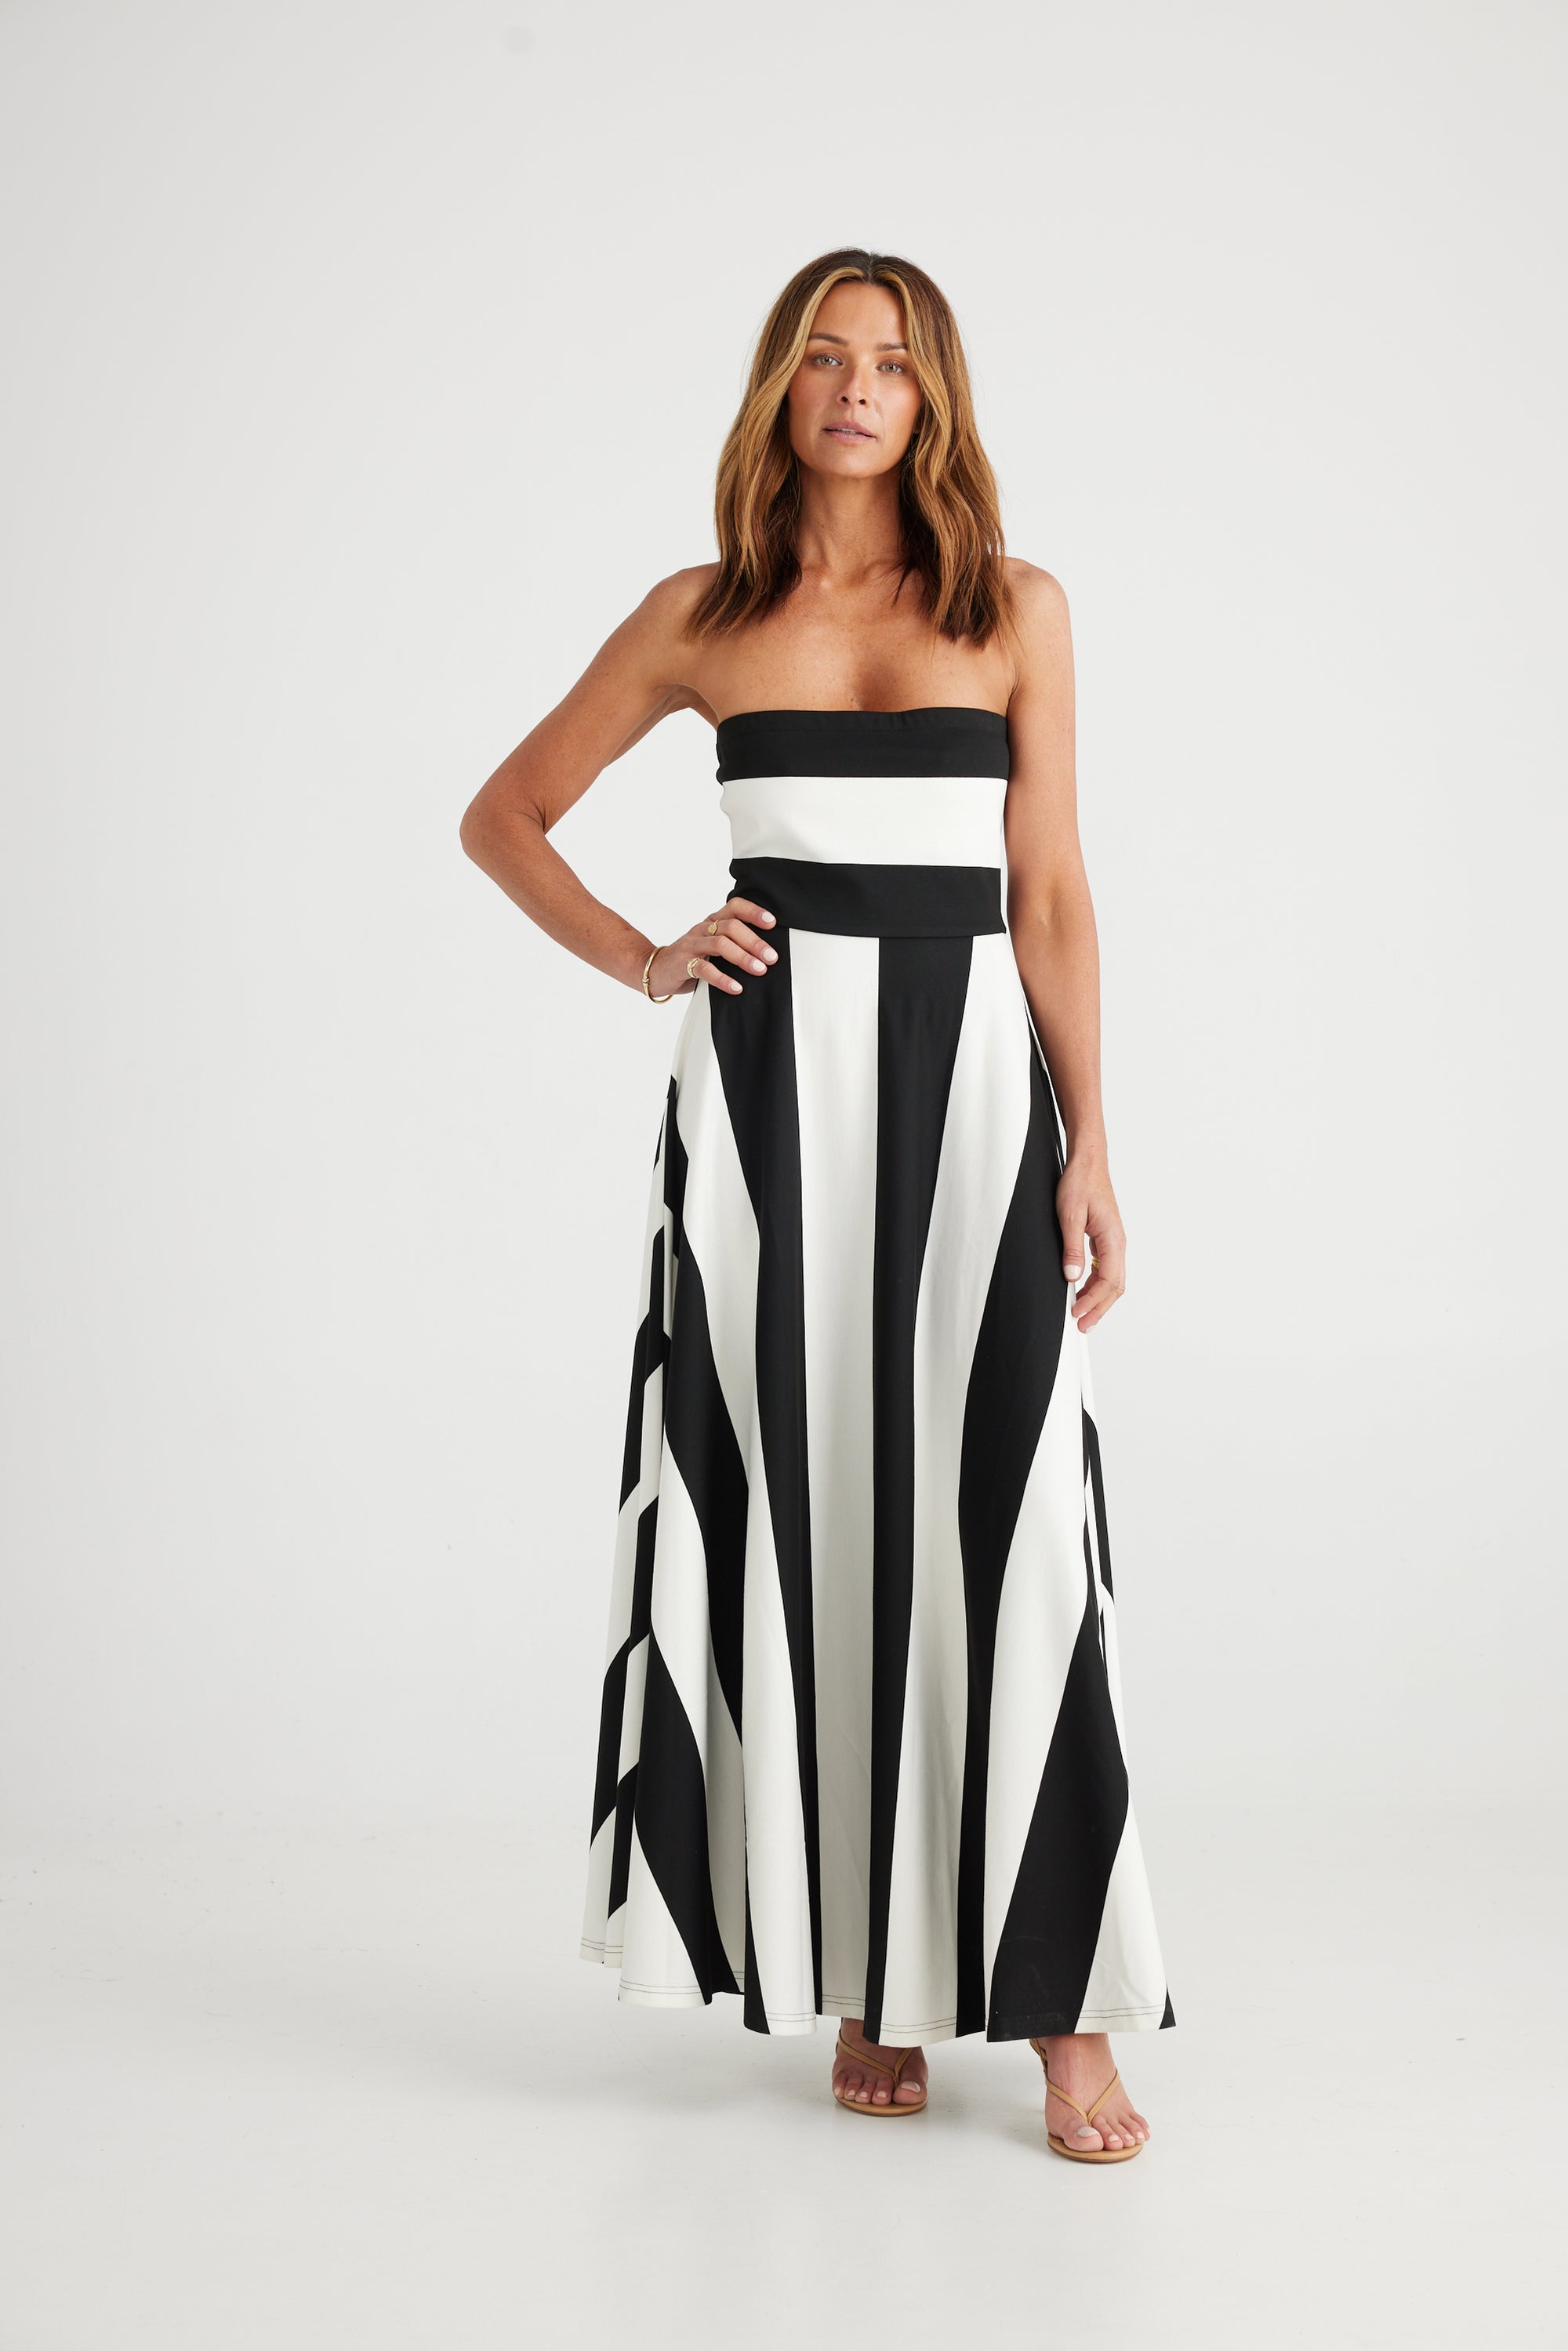 We Are Kindred Pippa Ruffle Maxi Dress in Noir Lurex